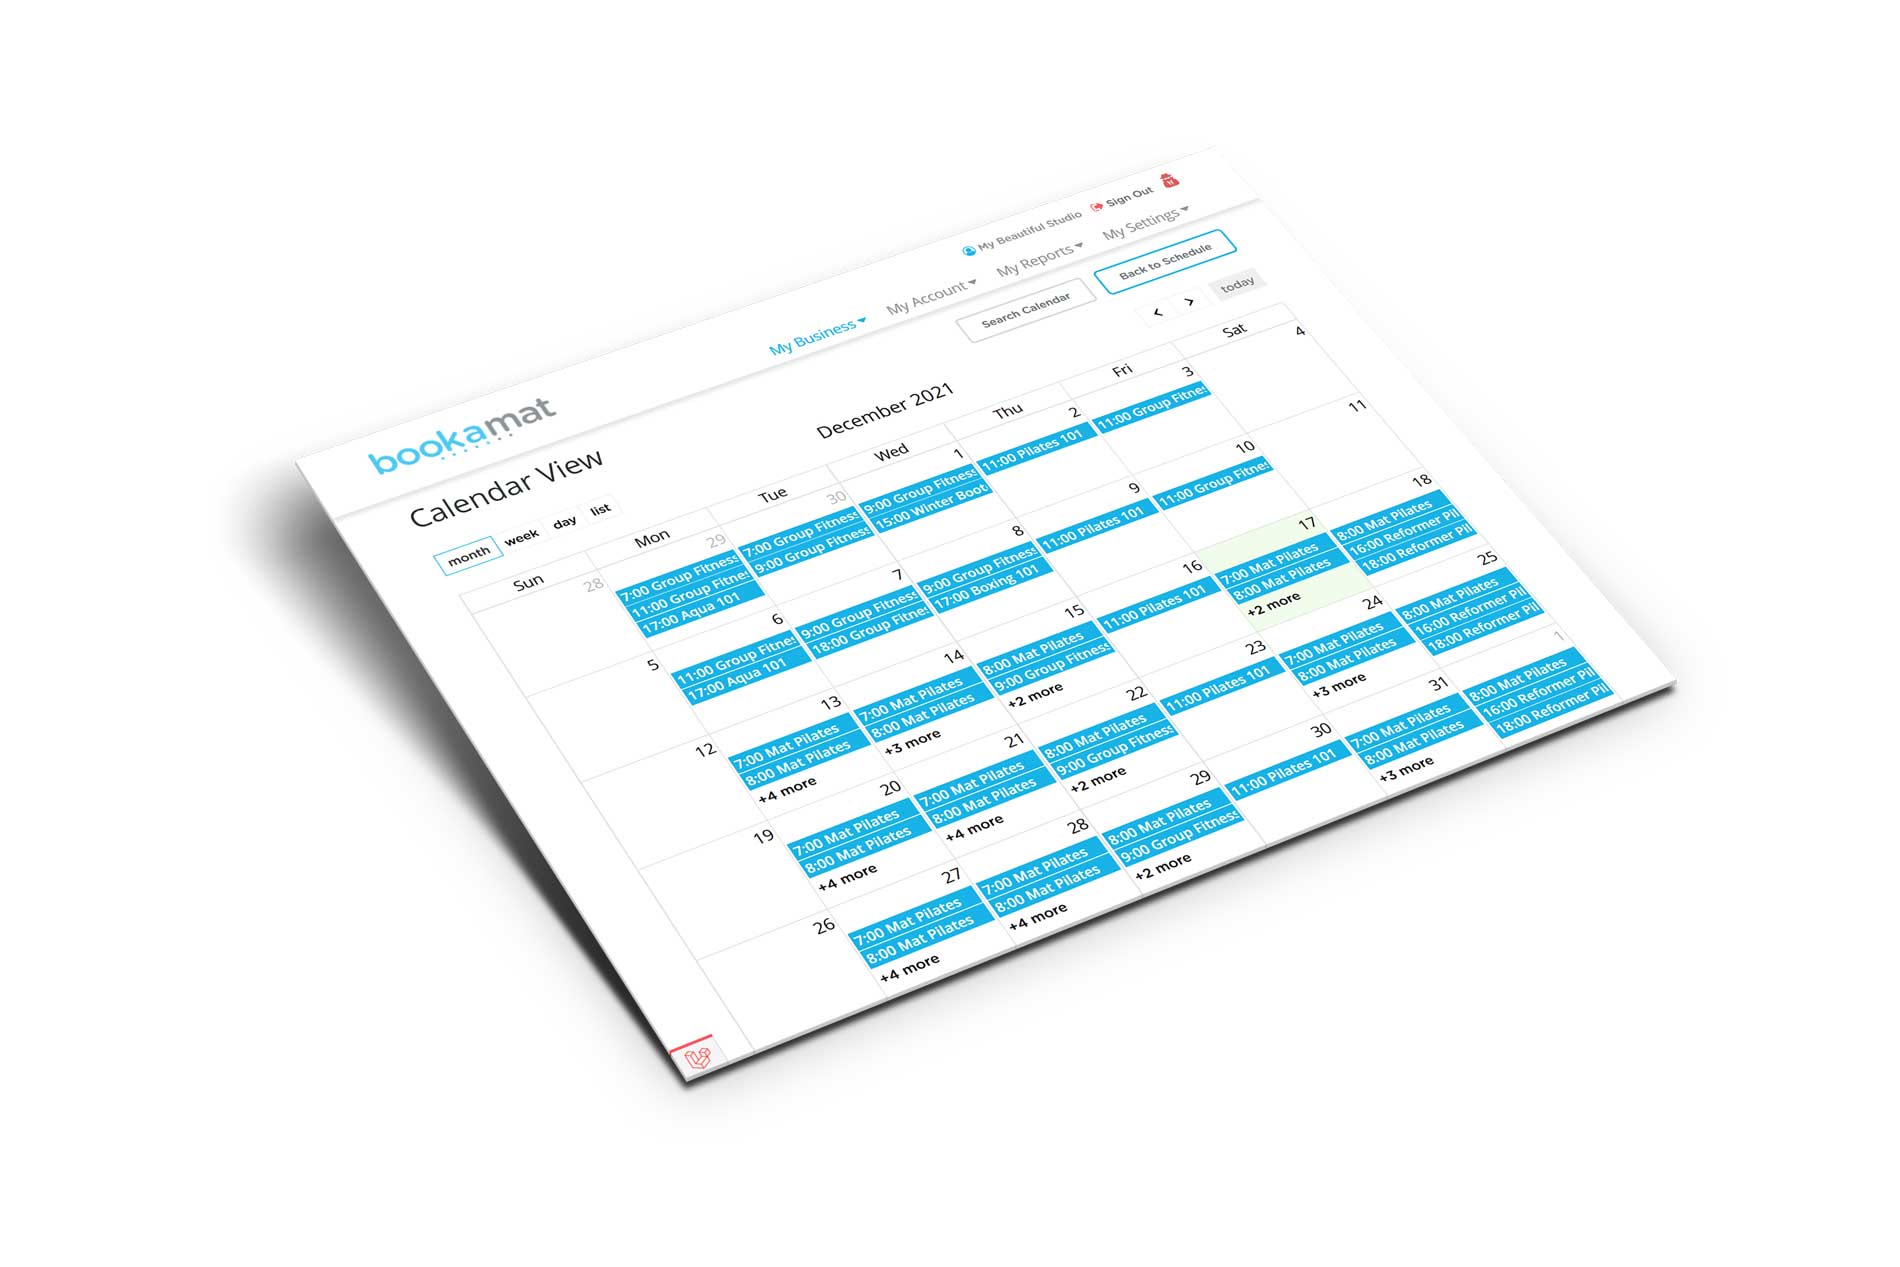 Completely customisable, with unlimited teachers, calendars and locations.